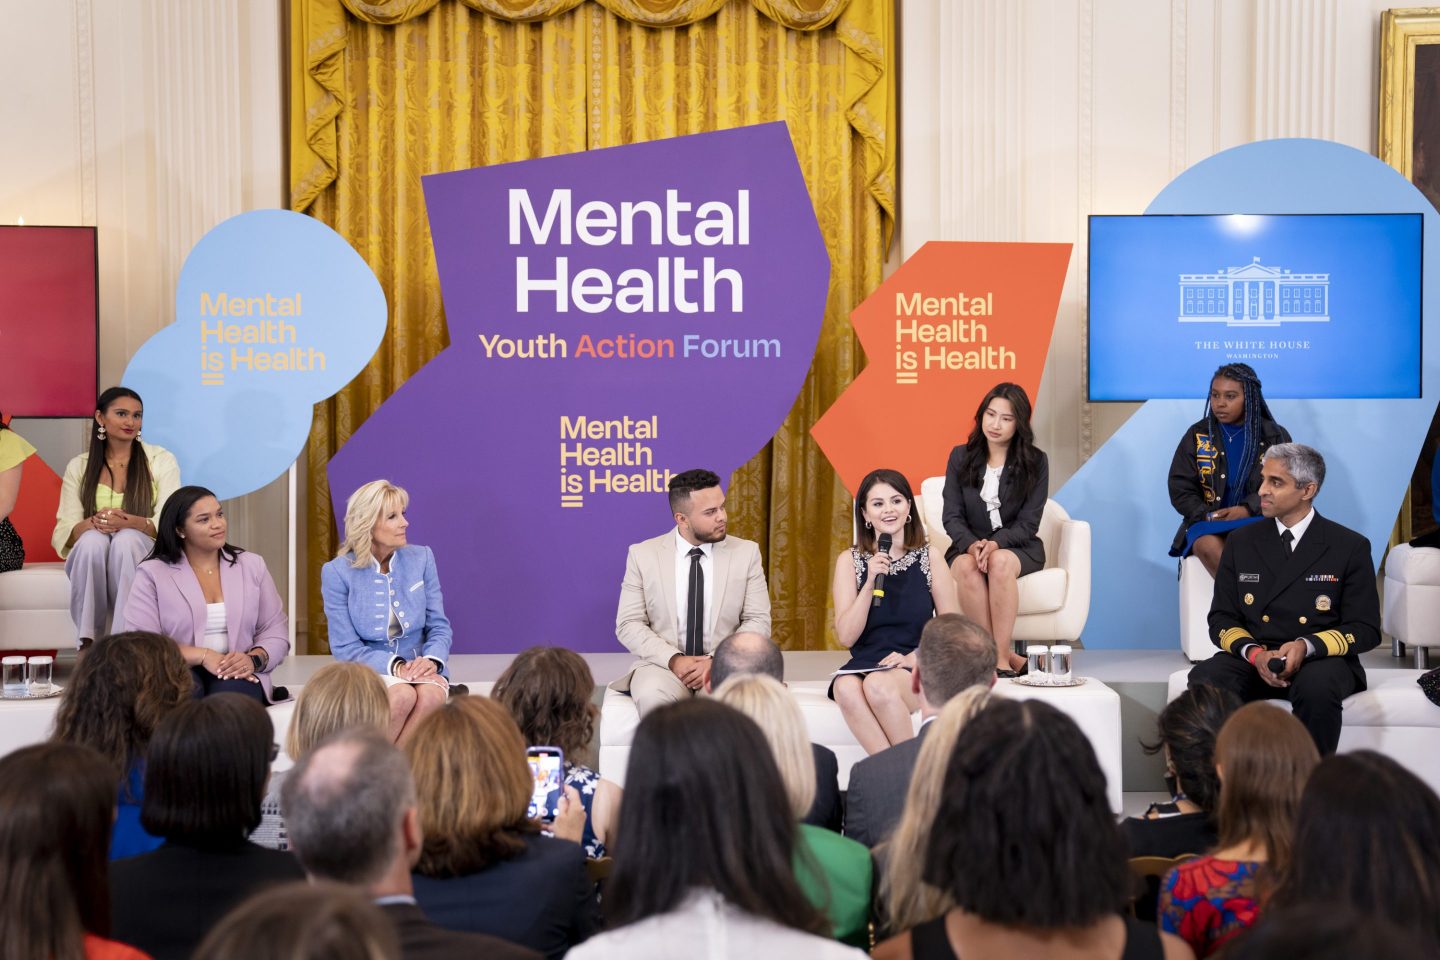 Panelists including First Lady Dr. Jill Biden and actress Selena Gomez discuss mental health at MTV’s 2022 mental health forum, where the idea for the Hidden Healers Fund originated.